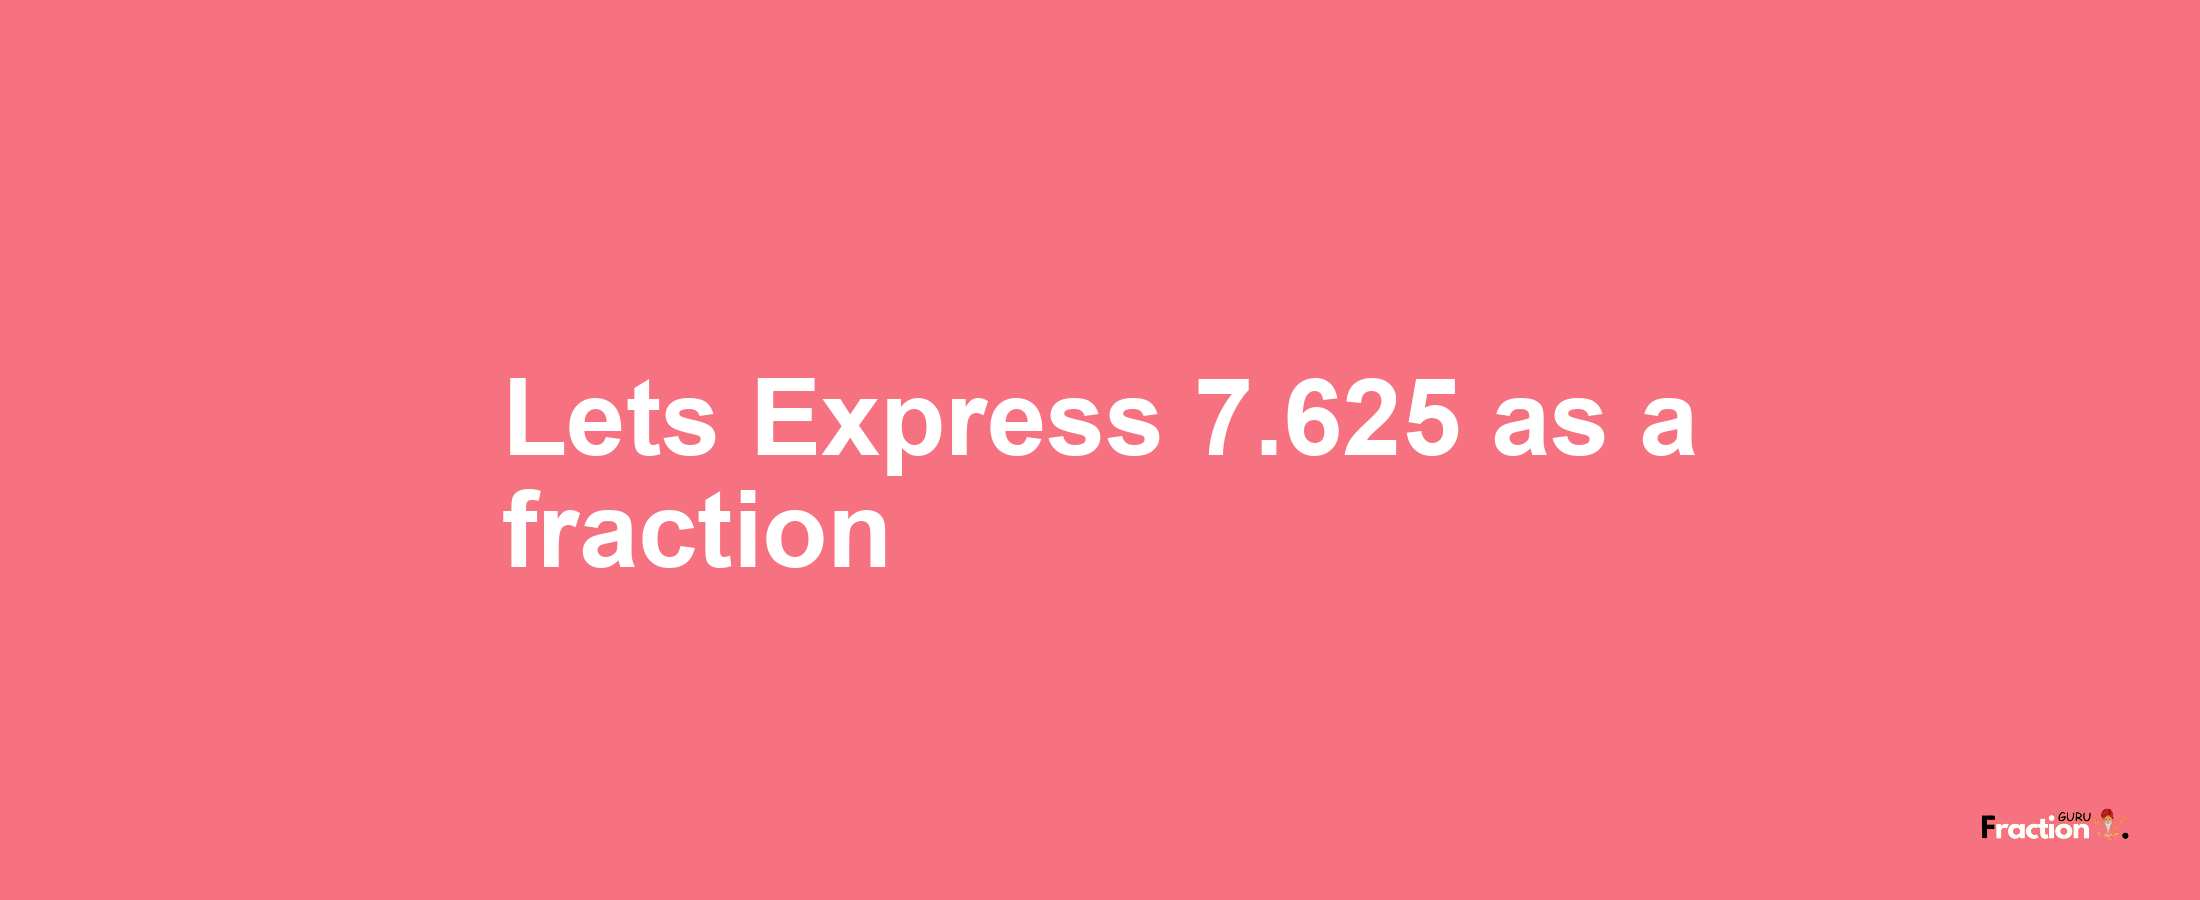 Lets Express 7.625 as afraction